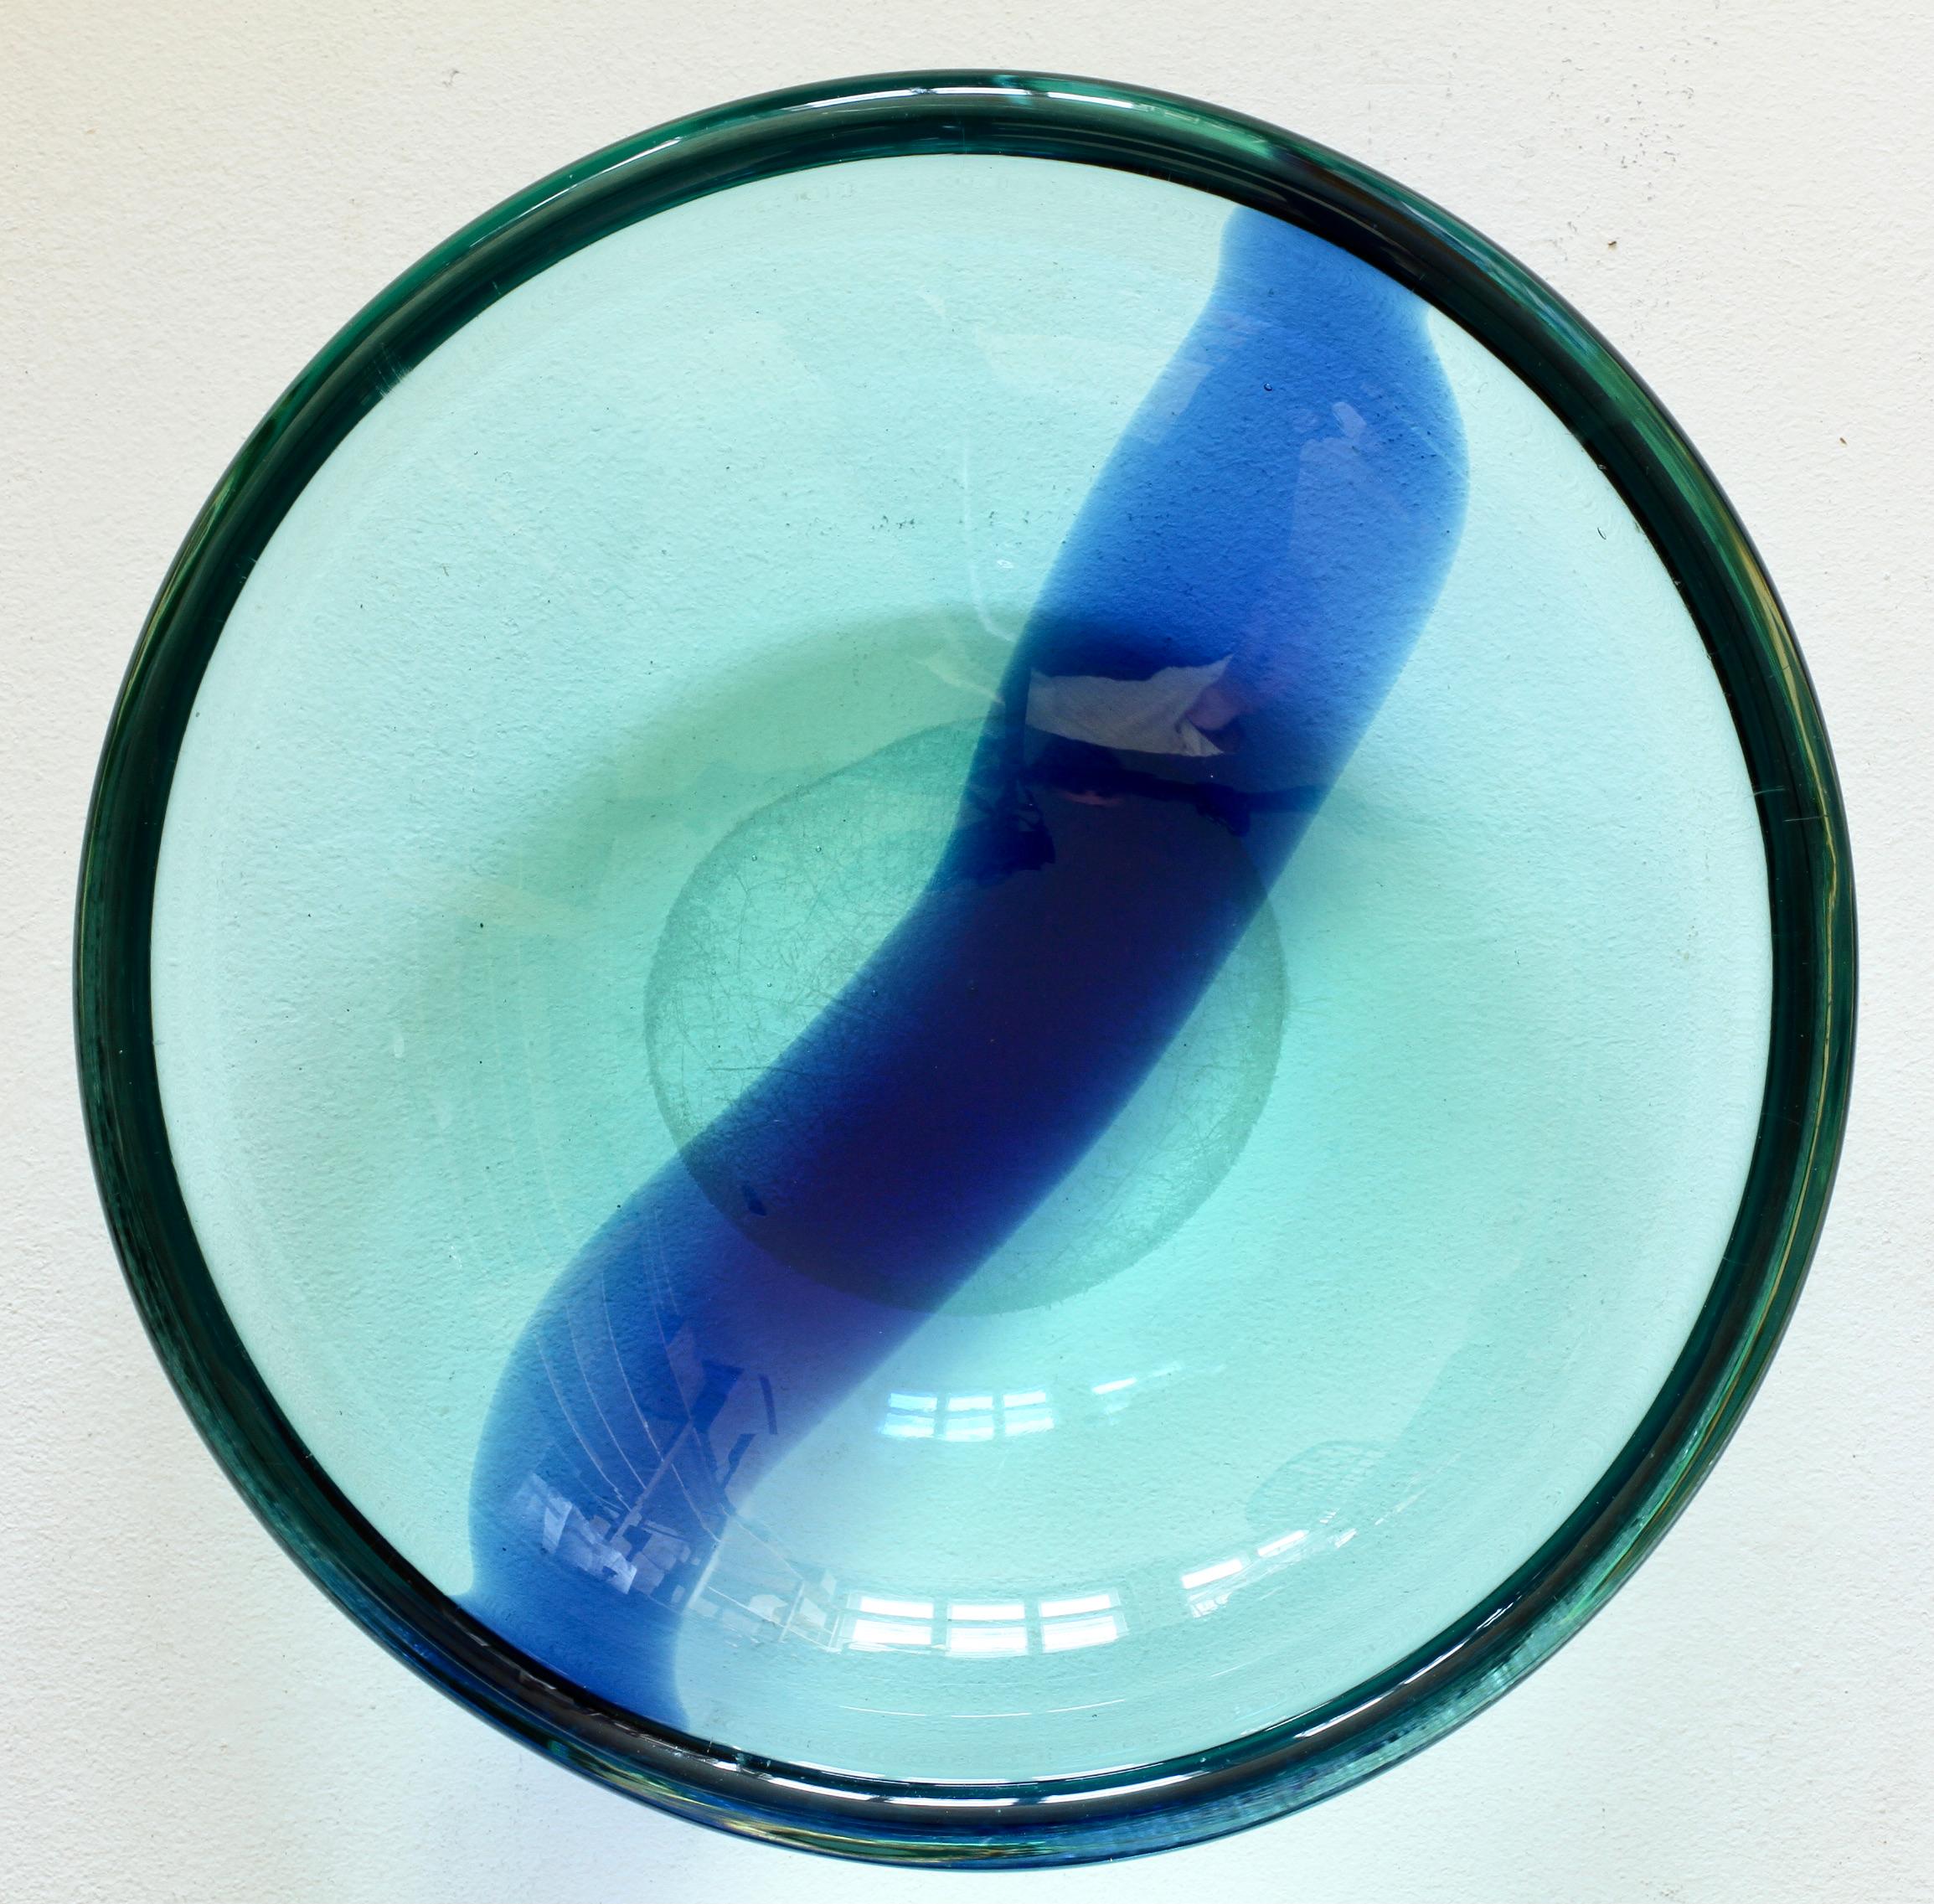 Vintage midcentury huge, large, heavy and thick light ocean blue coloured Italian glass bowl attributed to Antonio da Ros for Cenedese, Murano, Italy circa 1960. The style, form and colors of this piece do indicate the work and designs by Antonio da